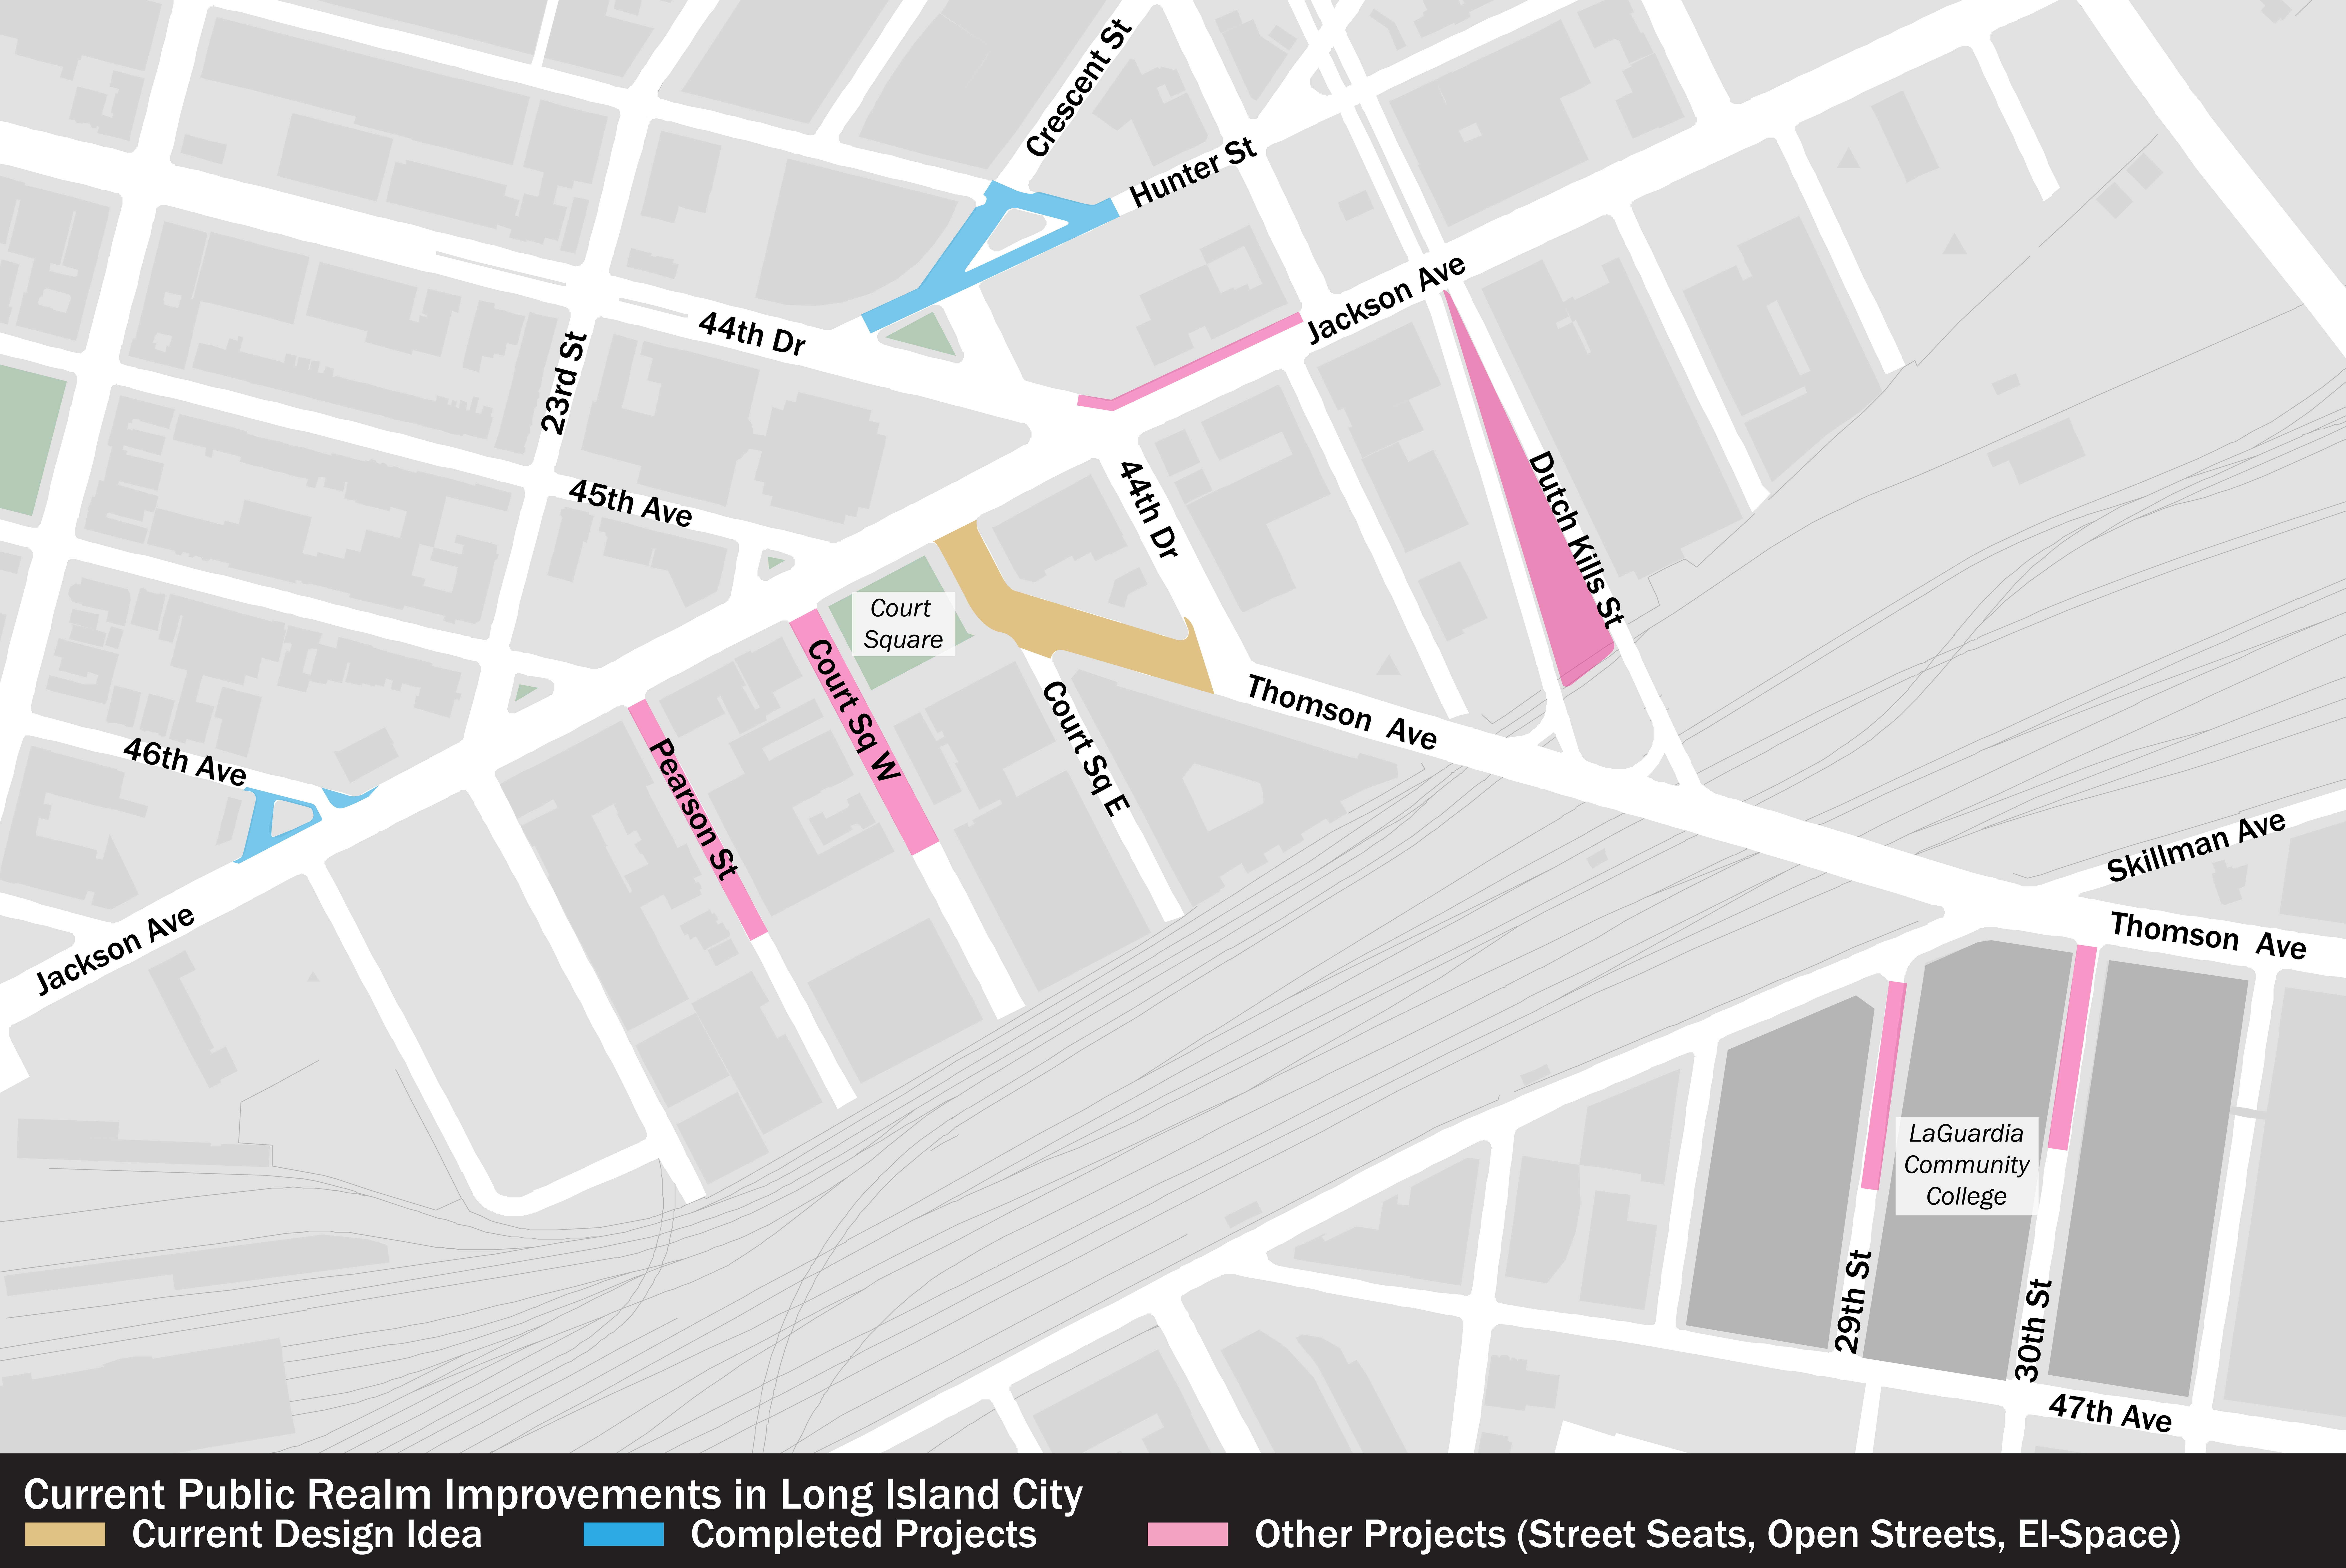 Map of Long Island City near Court Square showing previous and current NYC DOT public realm improvements.